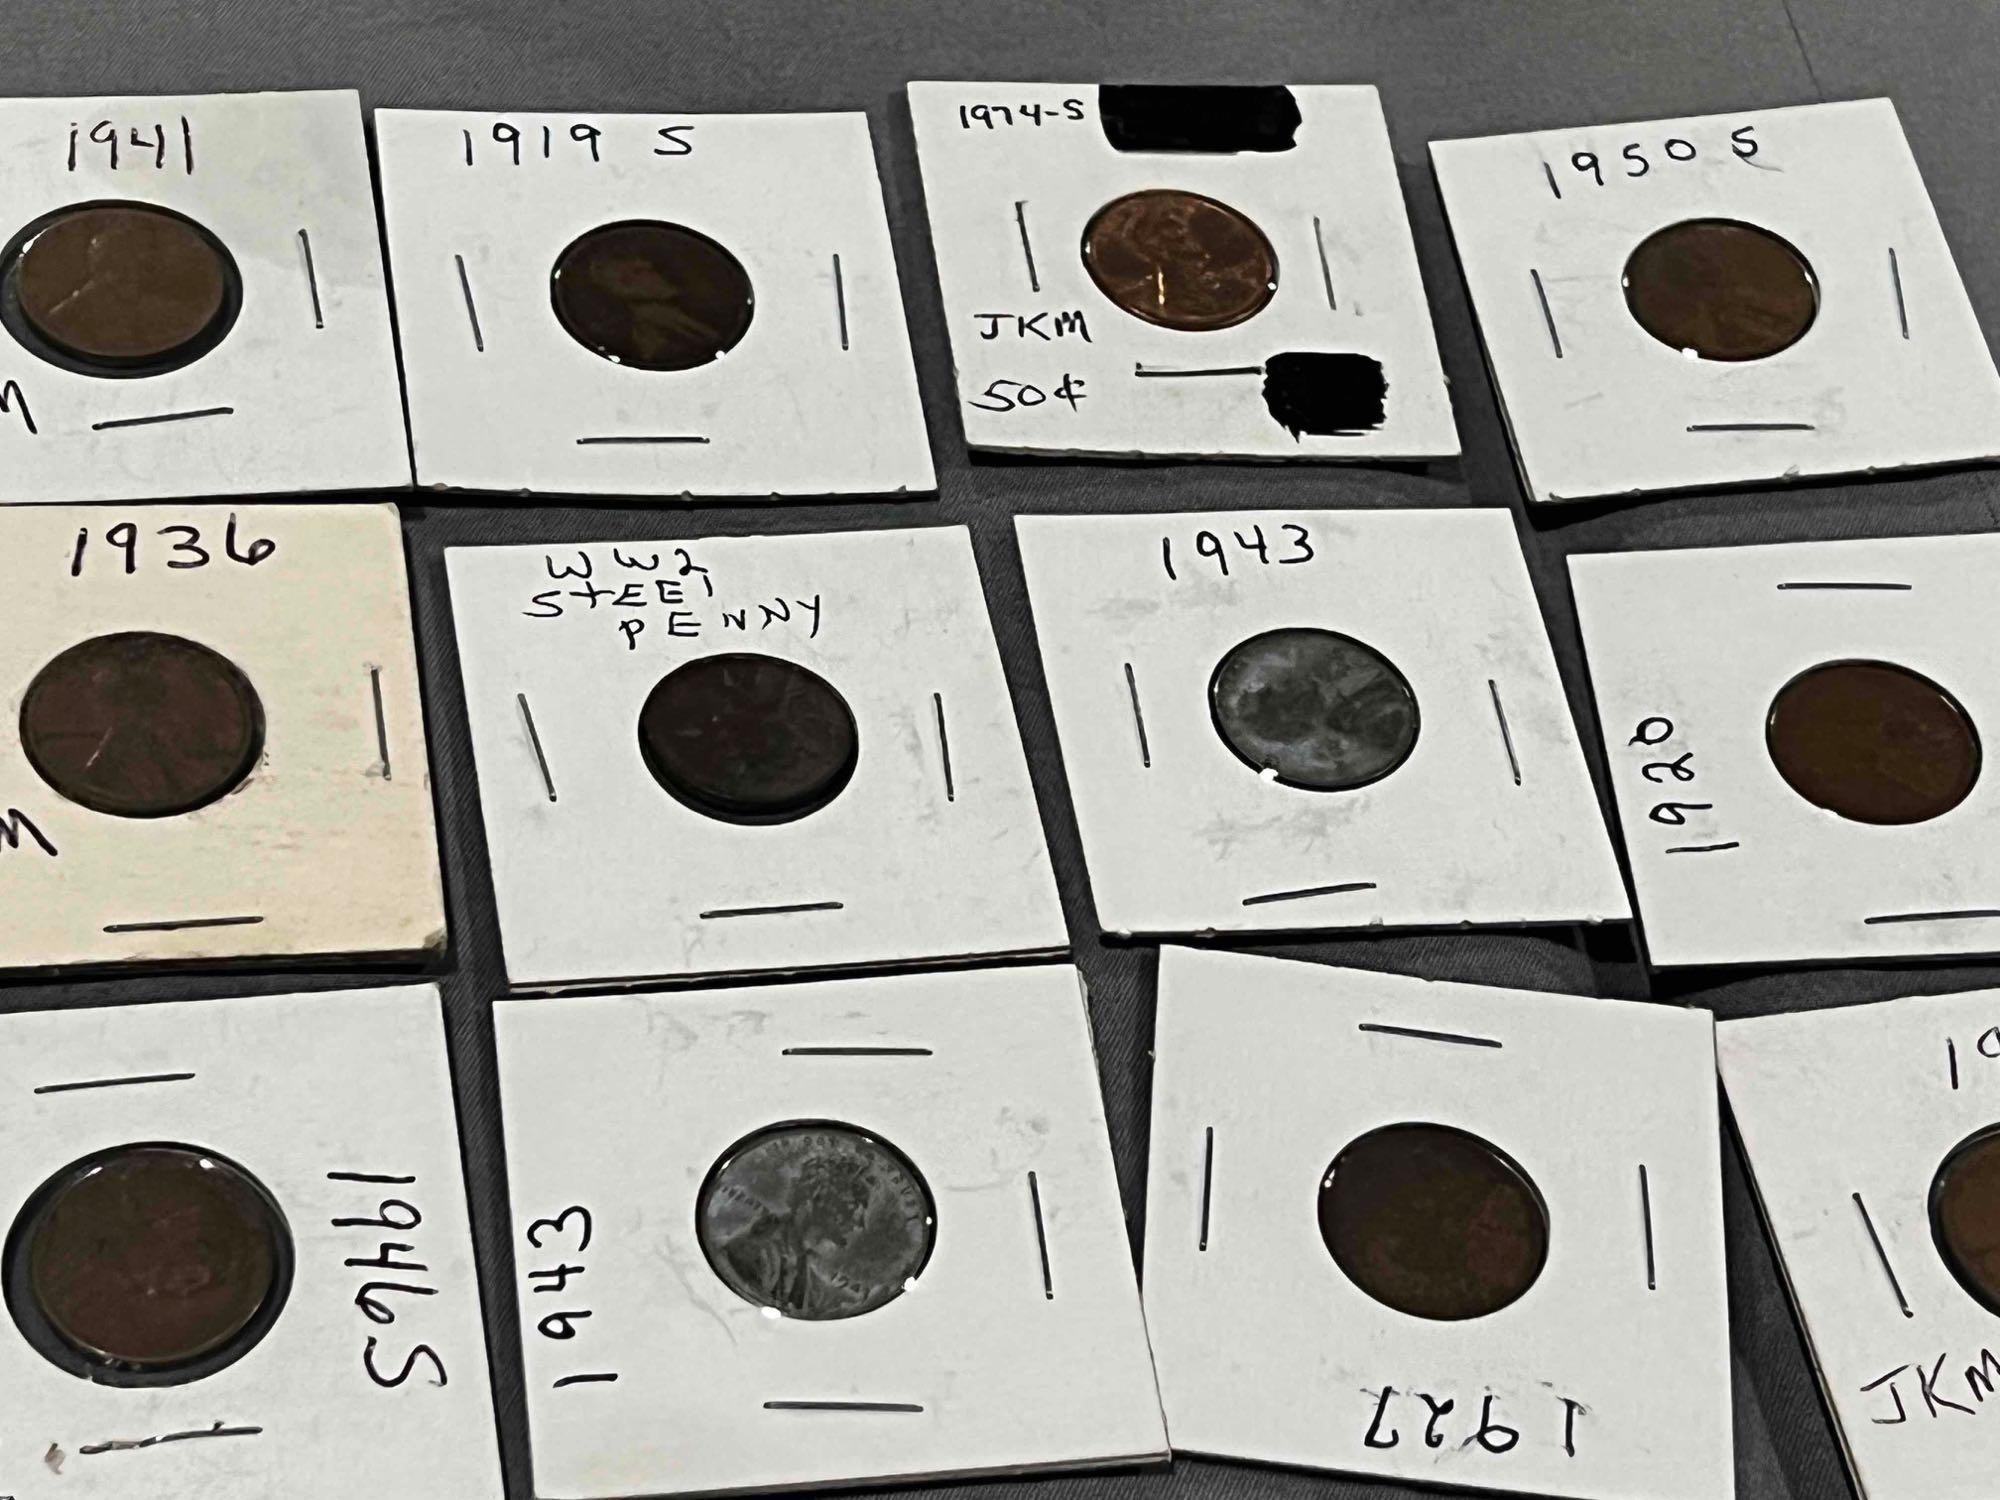 Large lot of Wheat Cents, Lincoln memorial cents and more